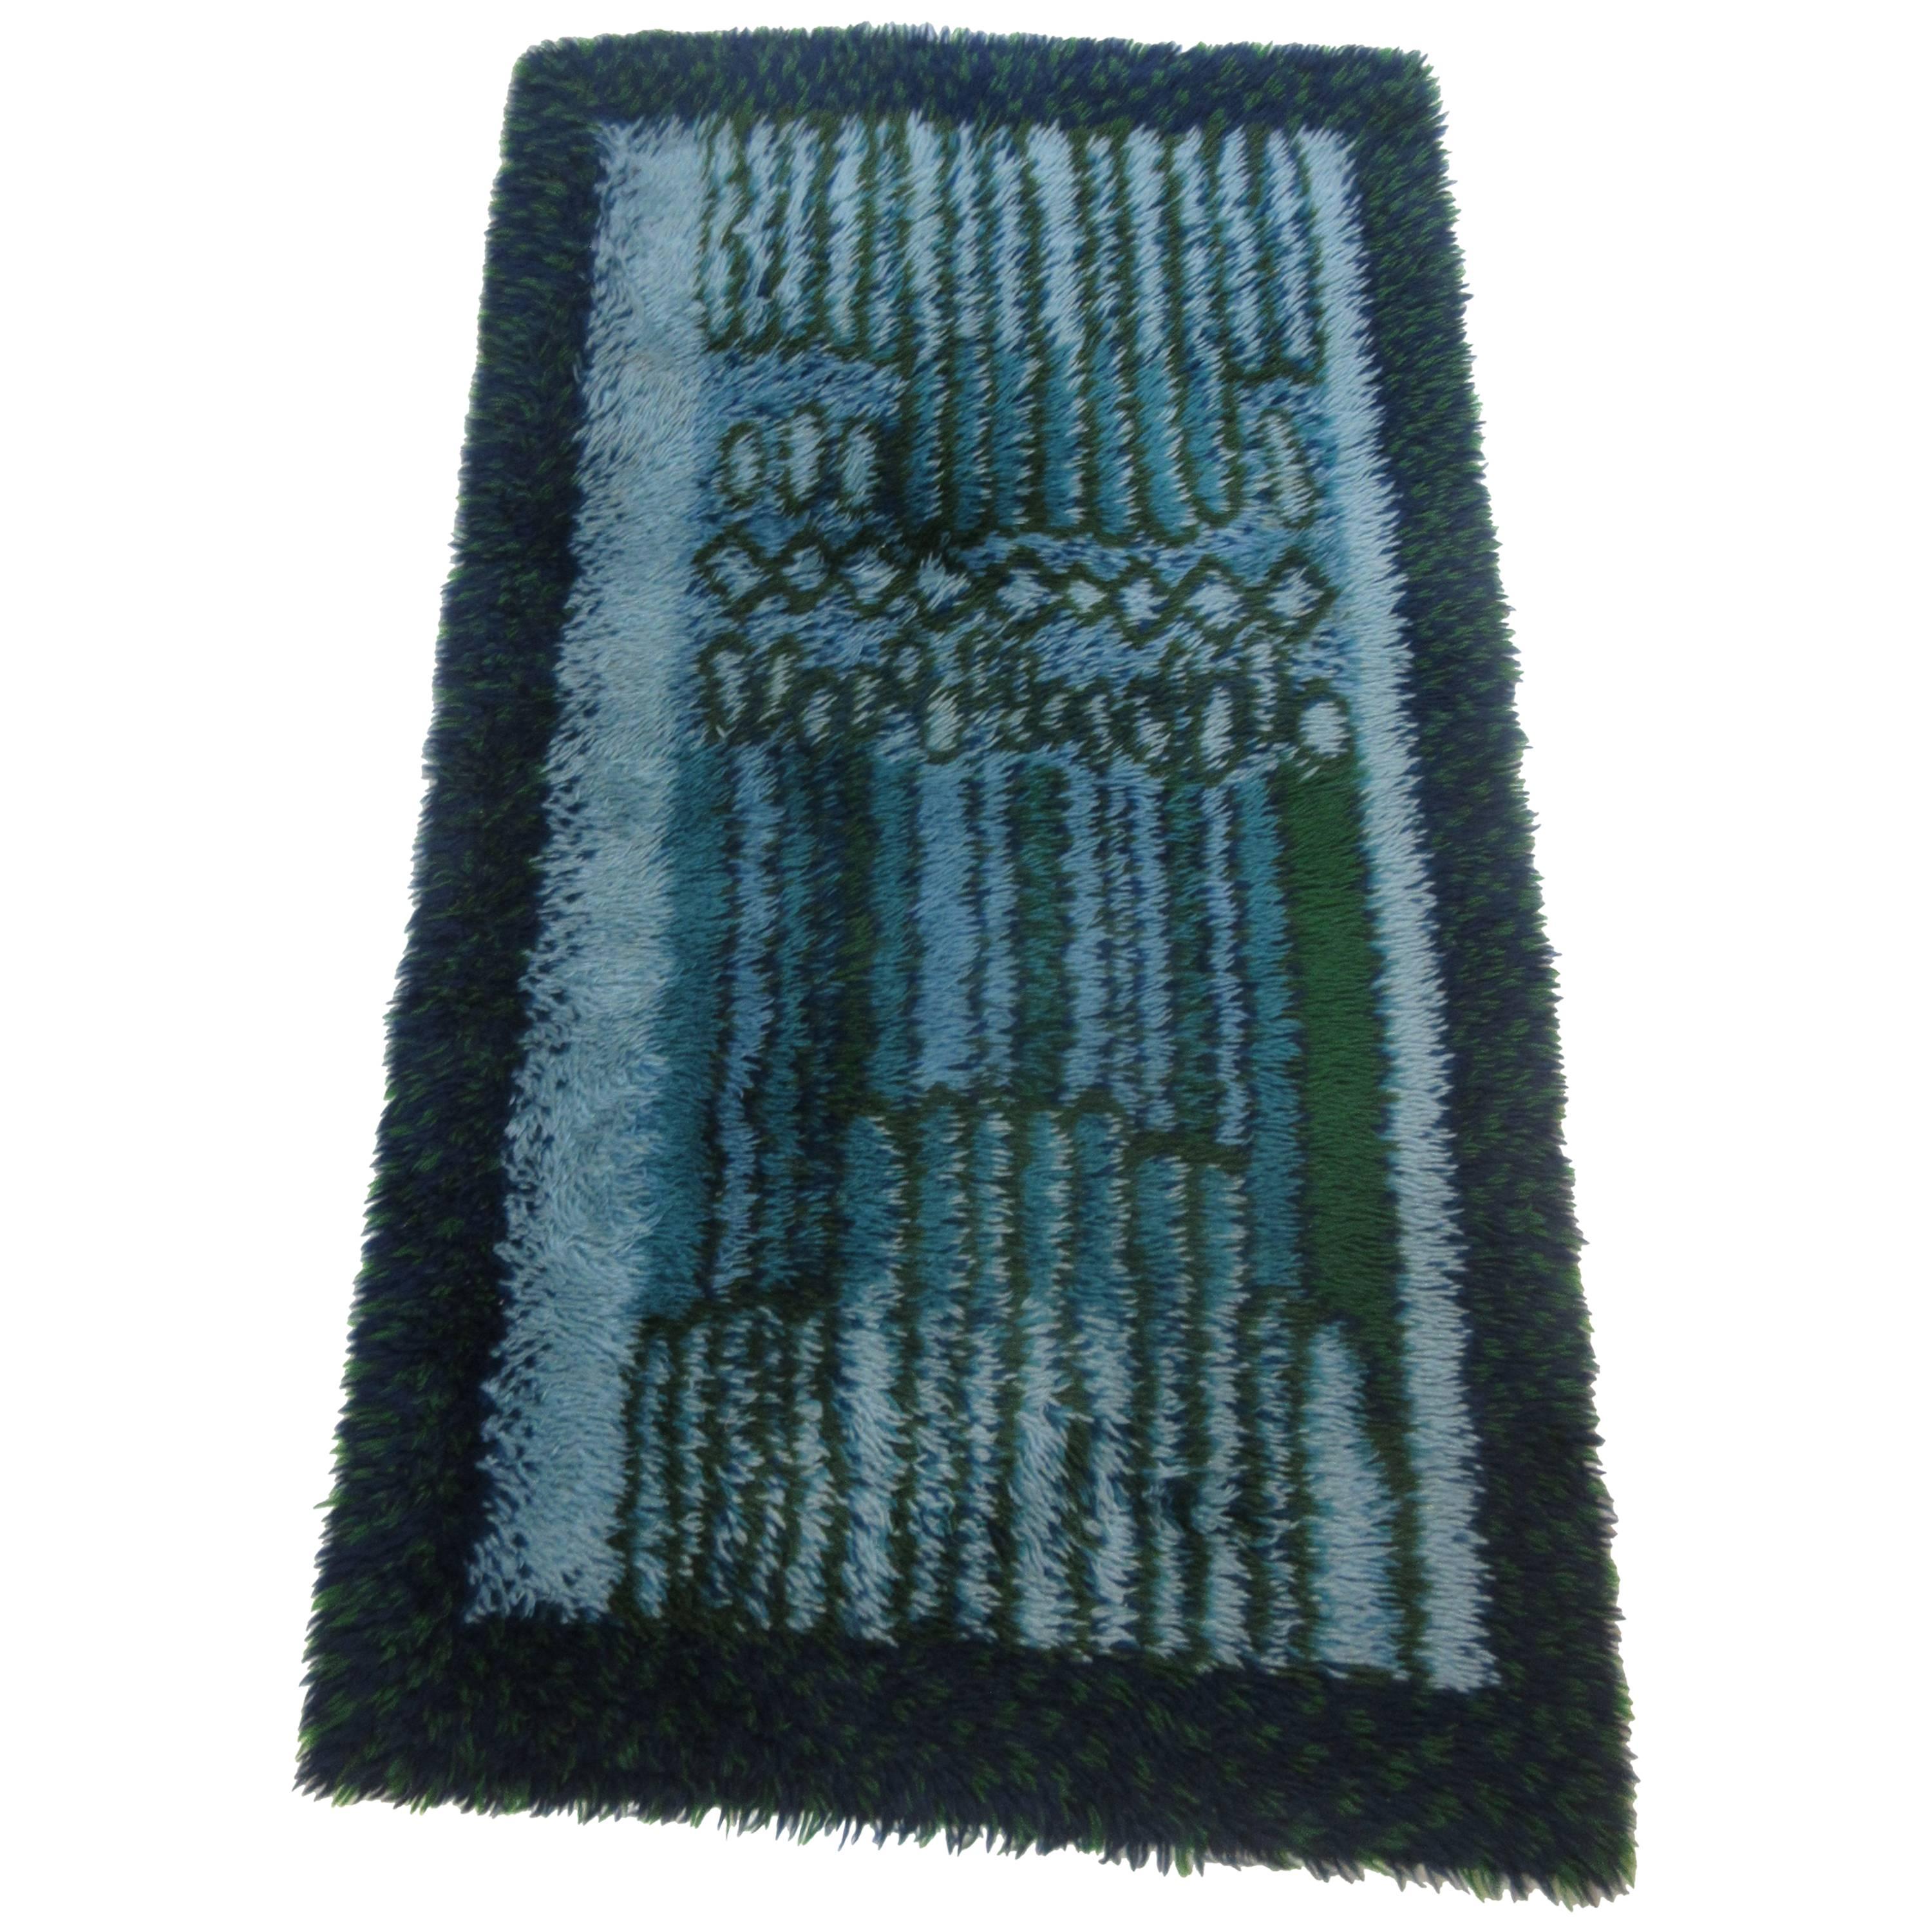 Rya Rug by Ege in Blue and Green Tones 